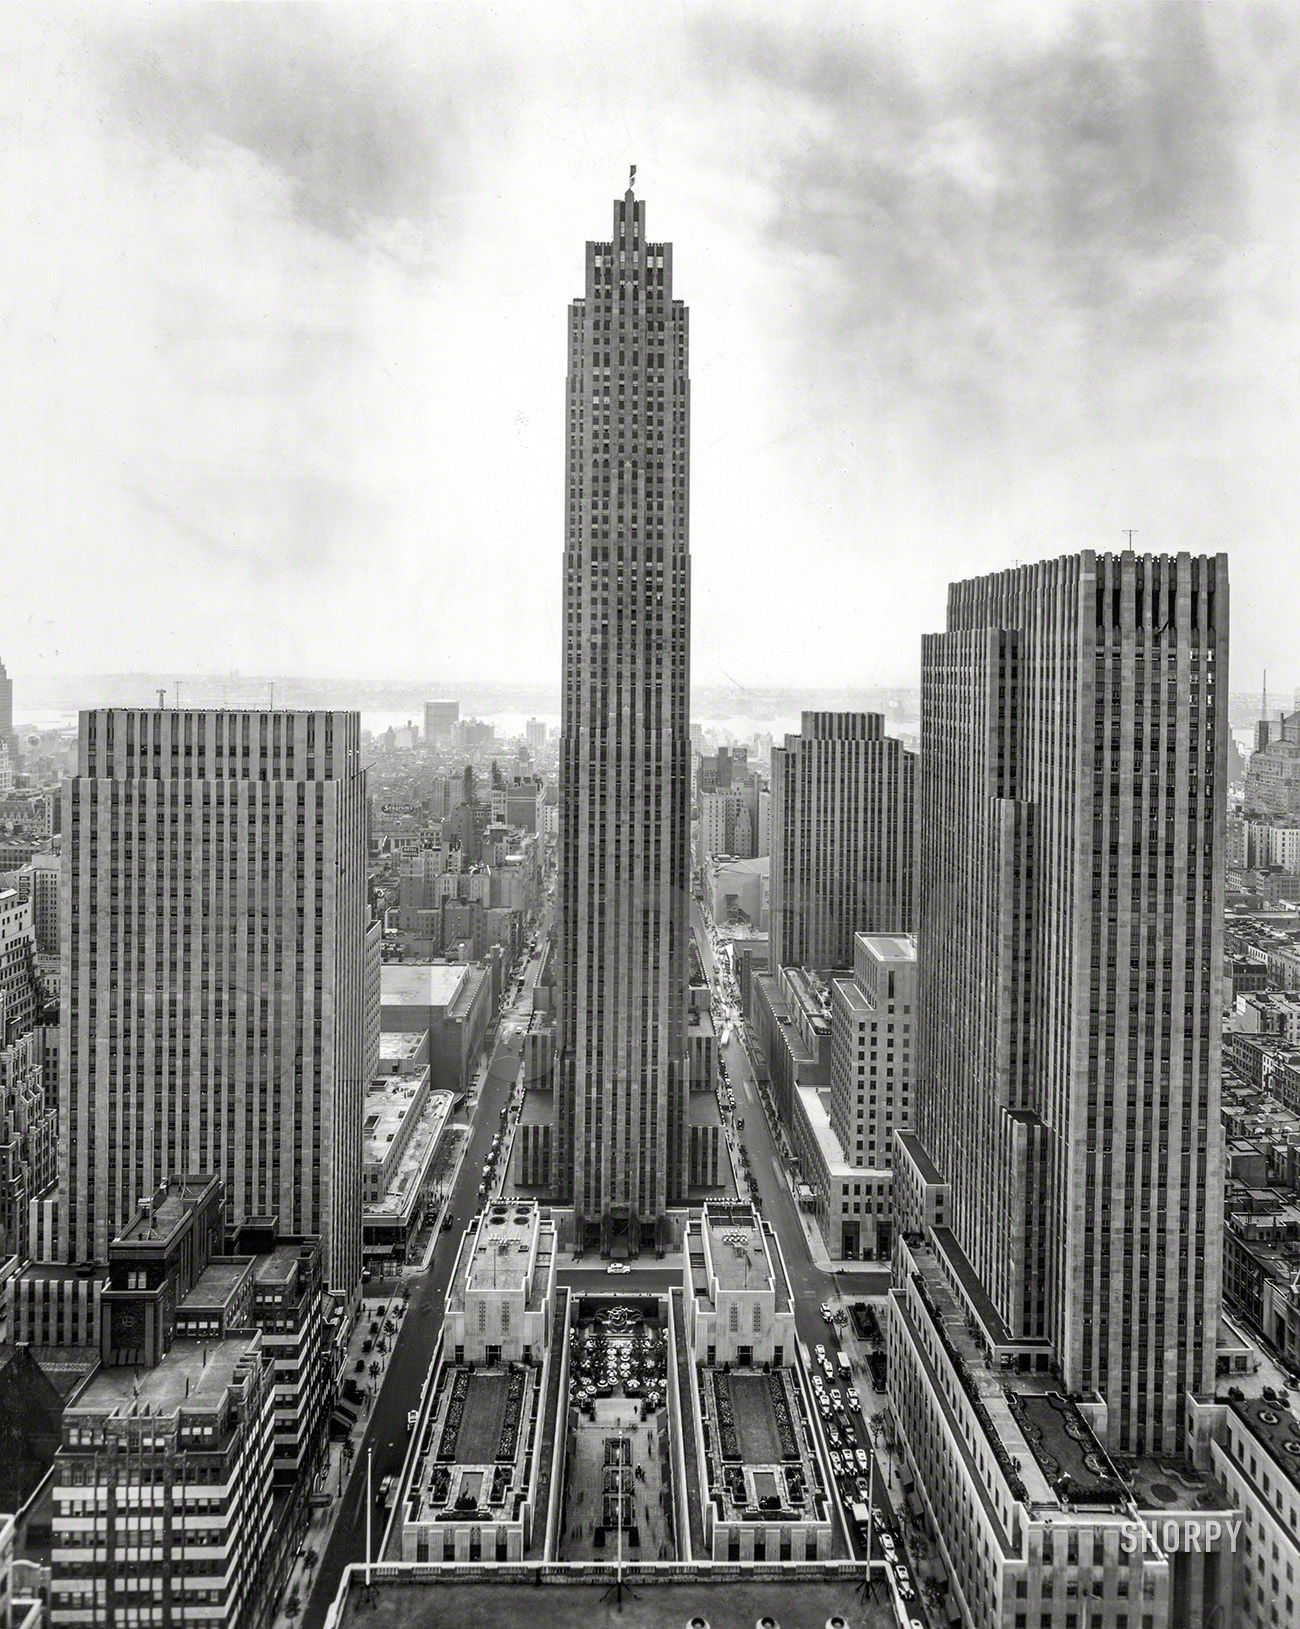 Rockefeller Center, New York, 1939. "Radio City buildings -- RCA." The sky&shy;scrap&shy;er known as 30 Rock. Gelatin silver print by Irving Underhill. View full size.